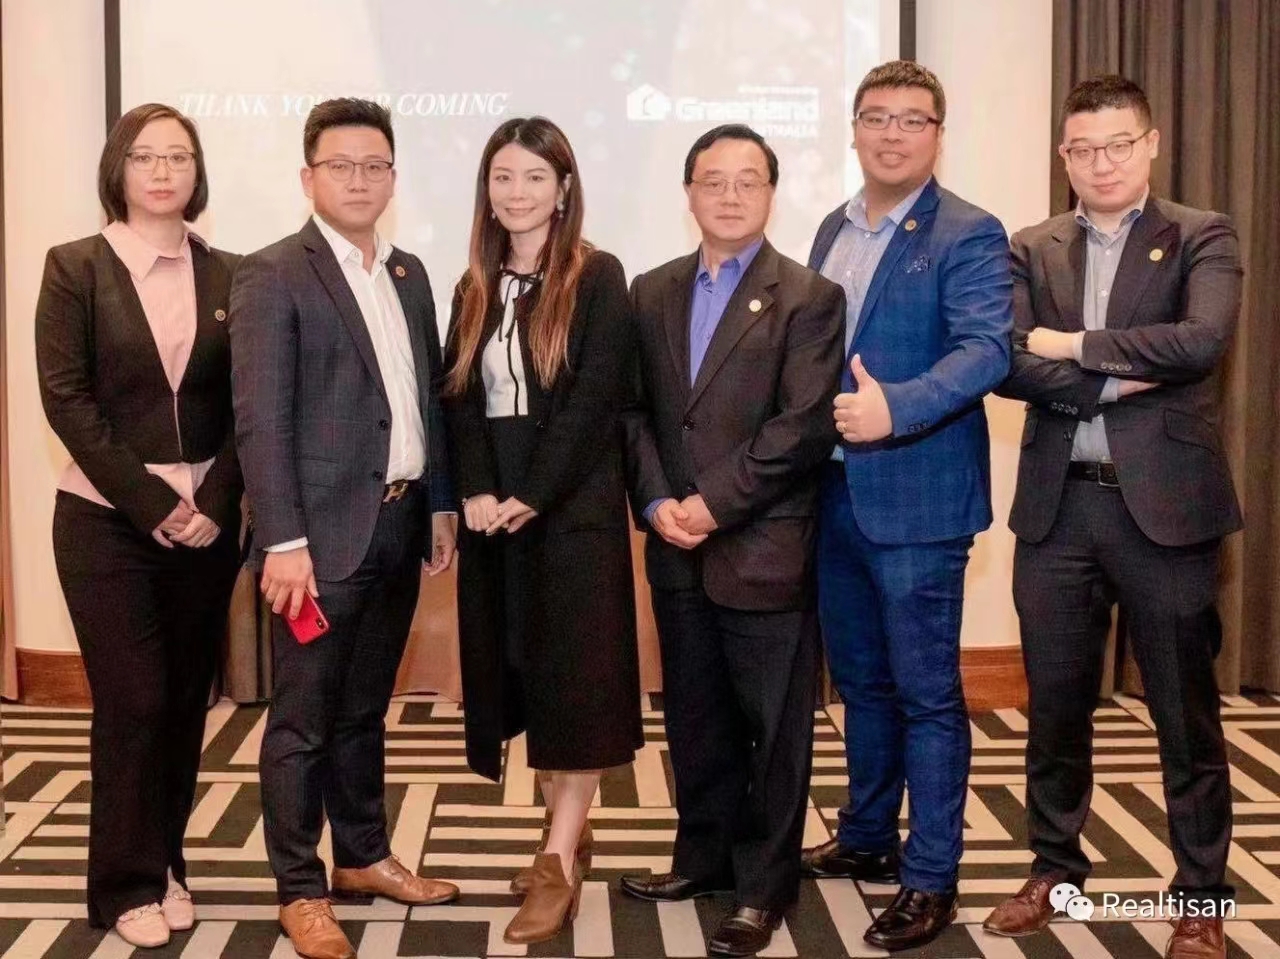 Realtisan joined the ‘2019 Real estate situation and prospect analysis exchange in Sydney’